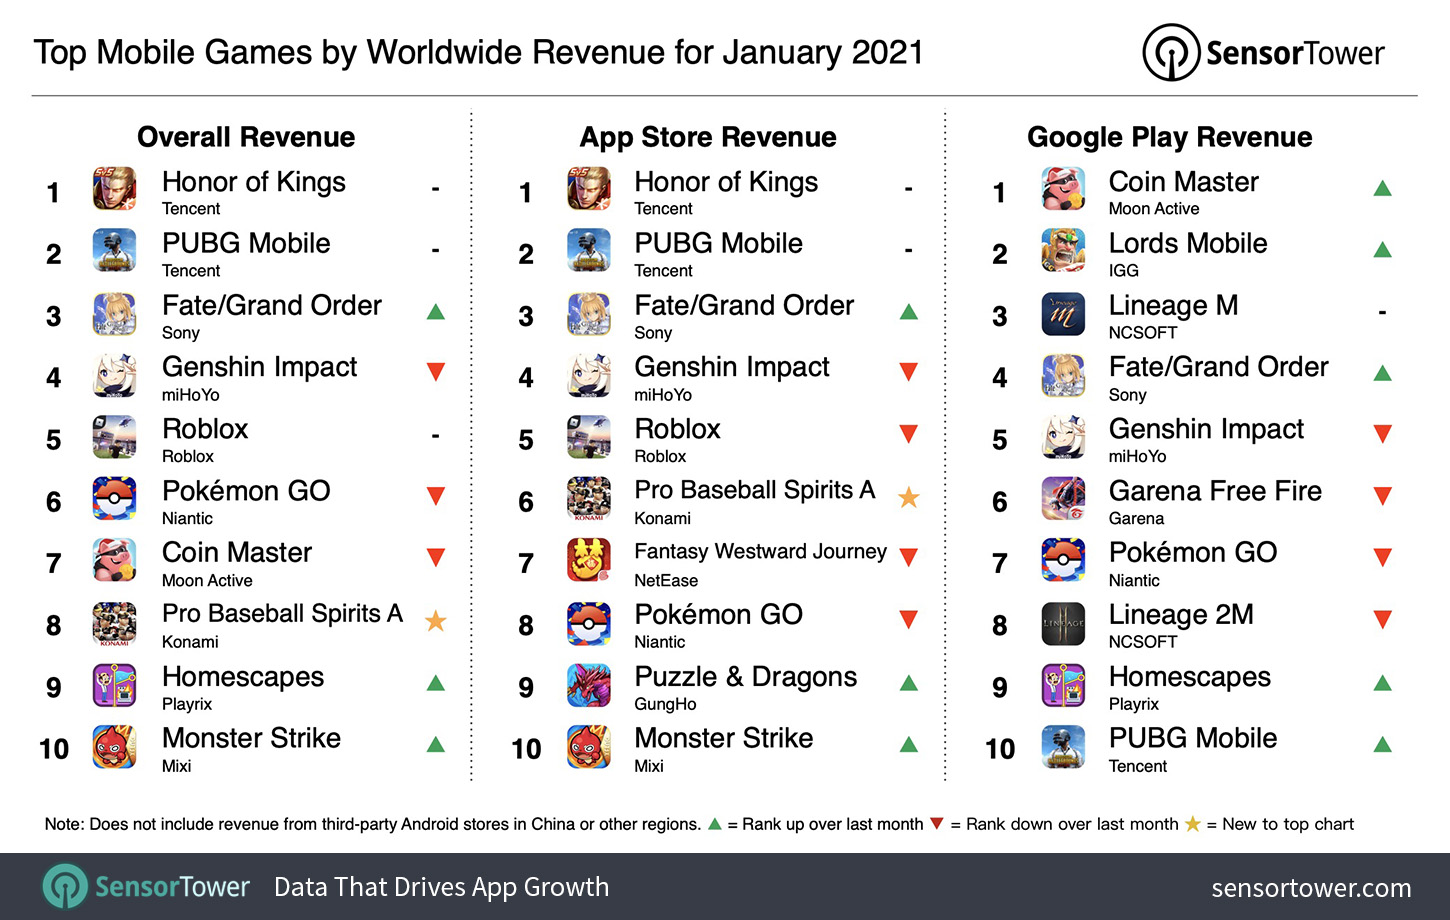 Top Grossing Mobile Games Worldwide for January 2021